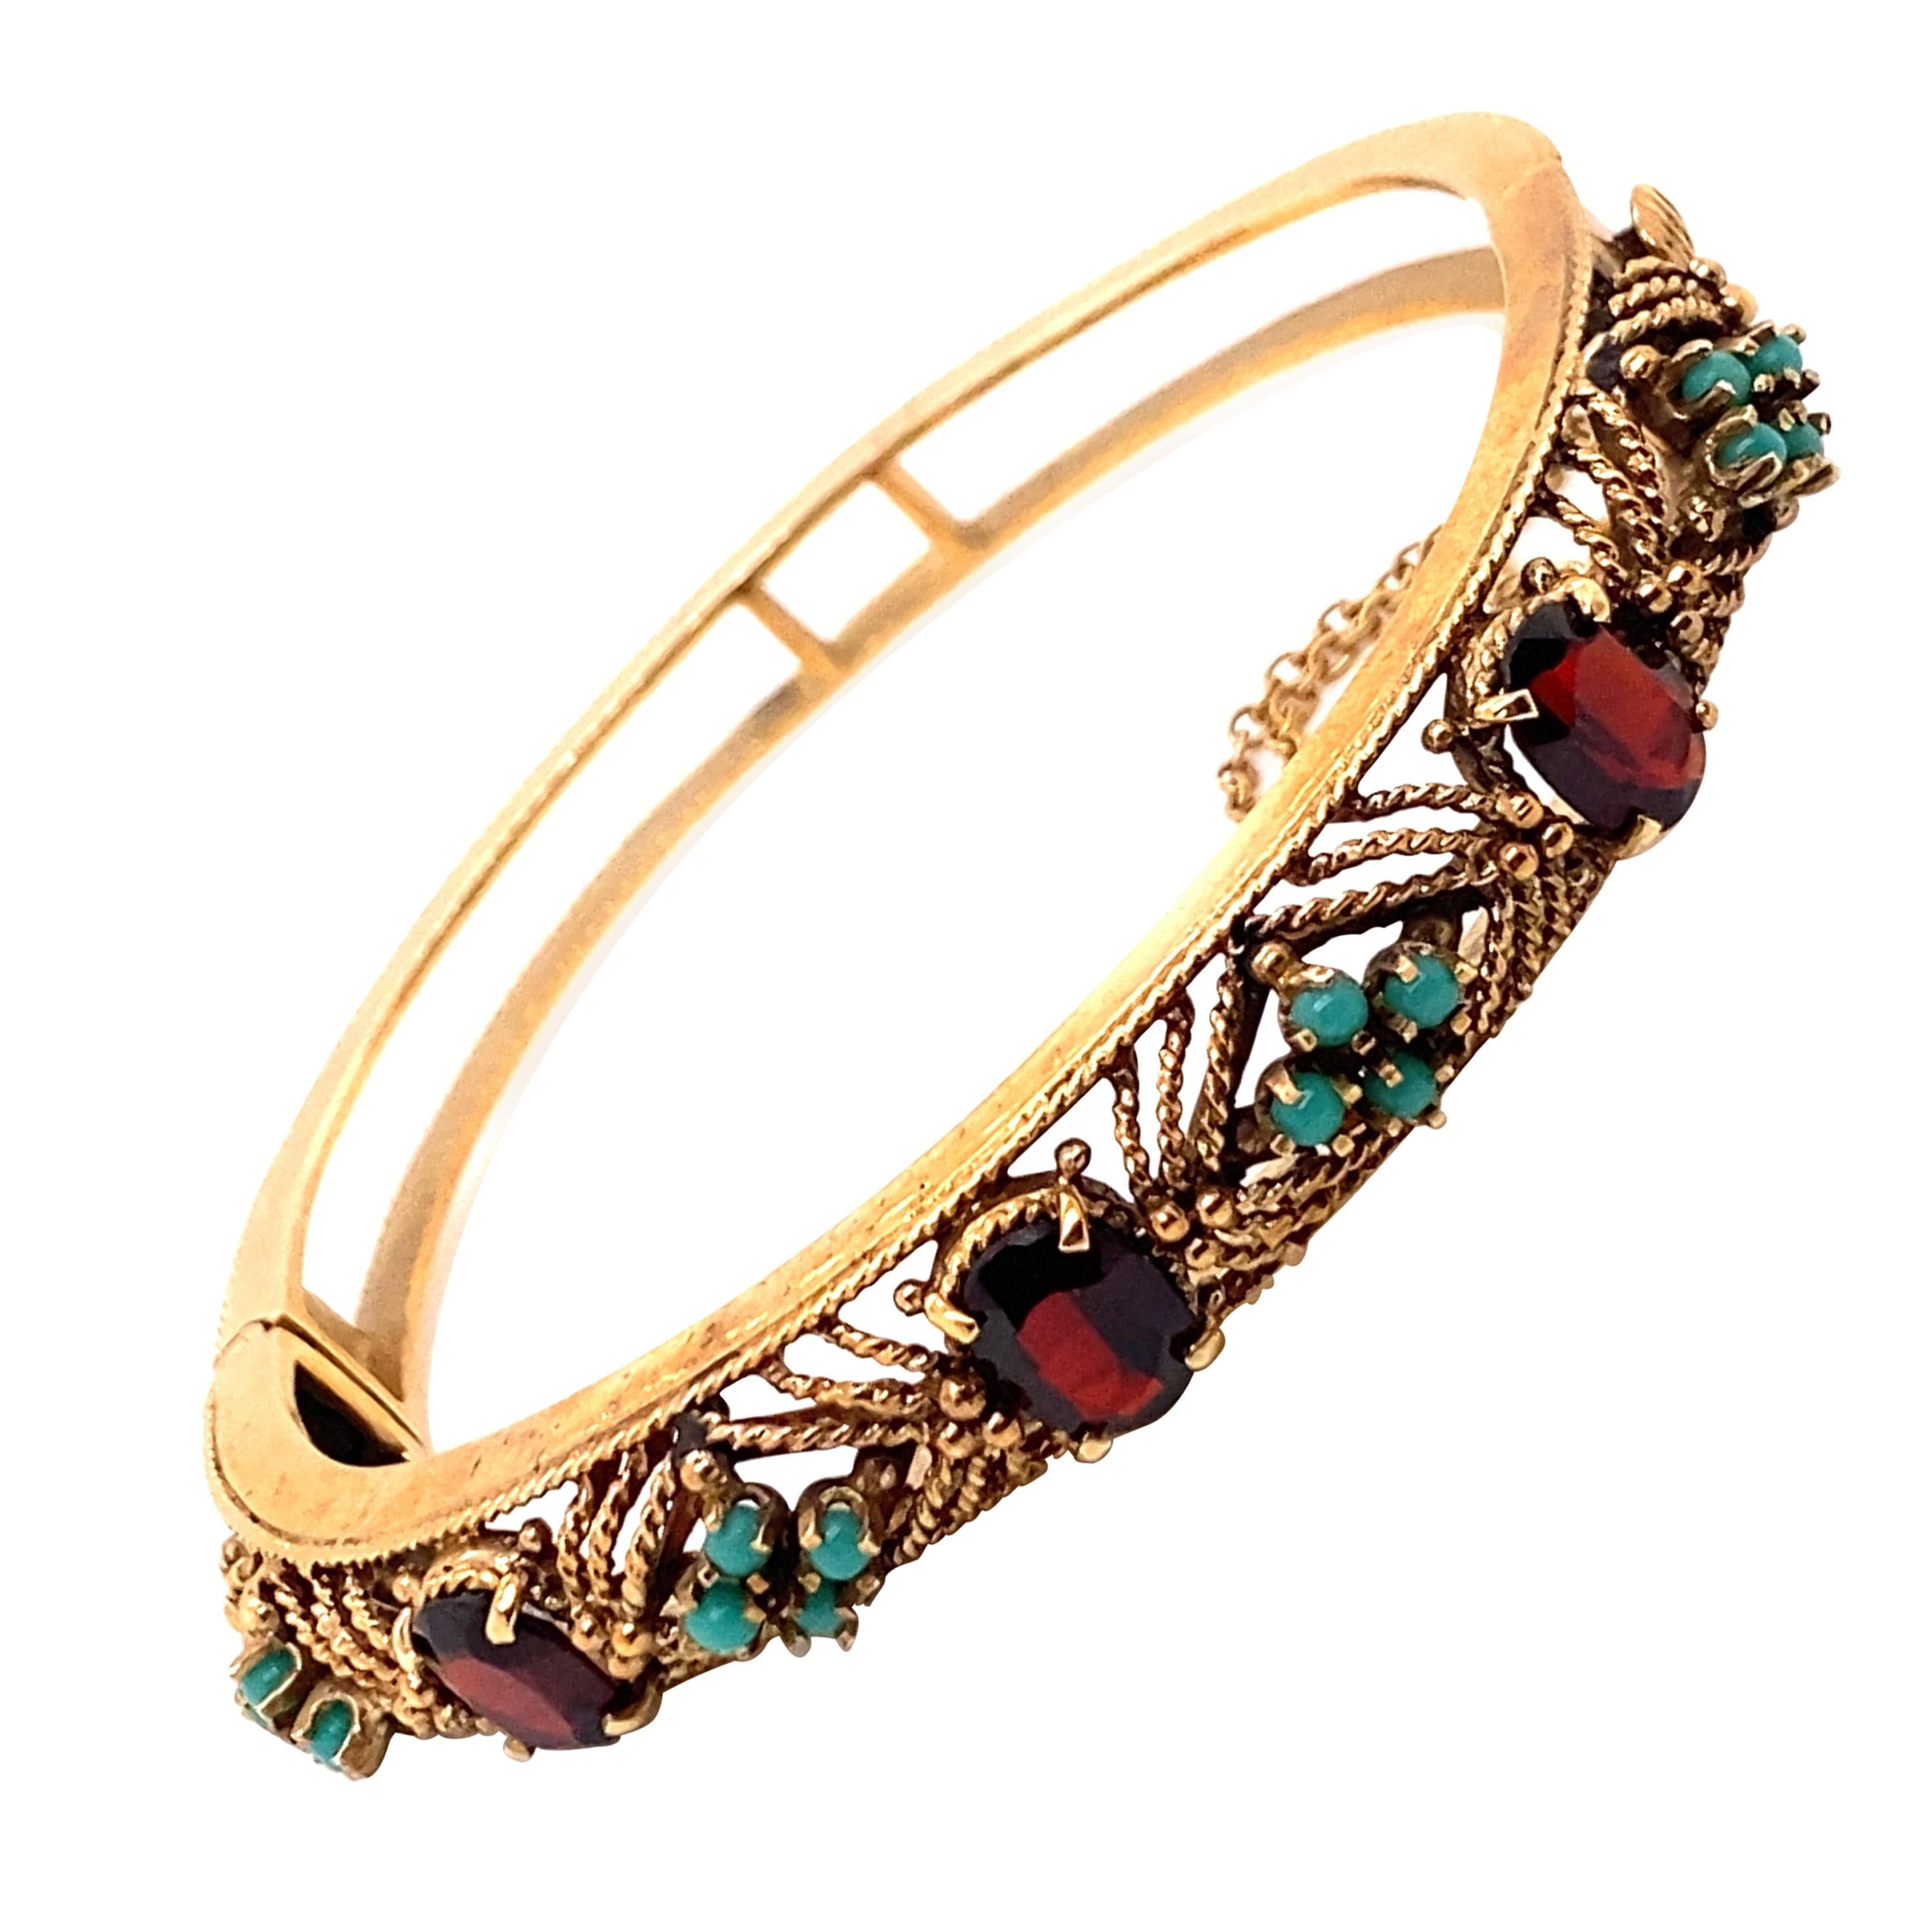 Vintage 1960's 14K Yellow Gold Bangle Bracelet with Garnet and Turquoise For Sale